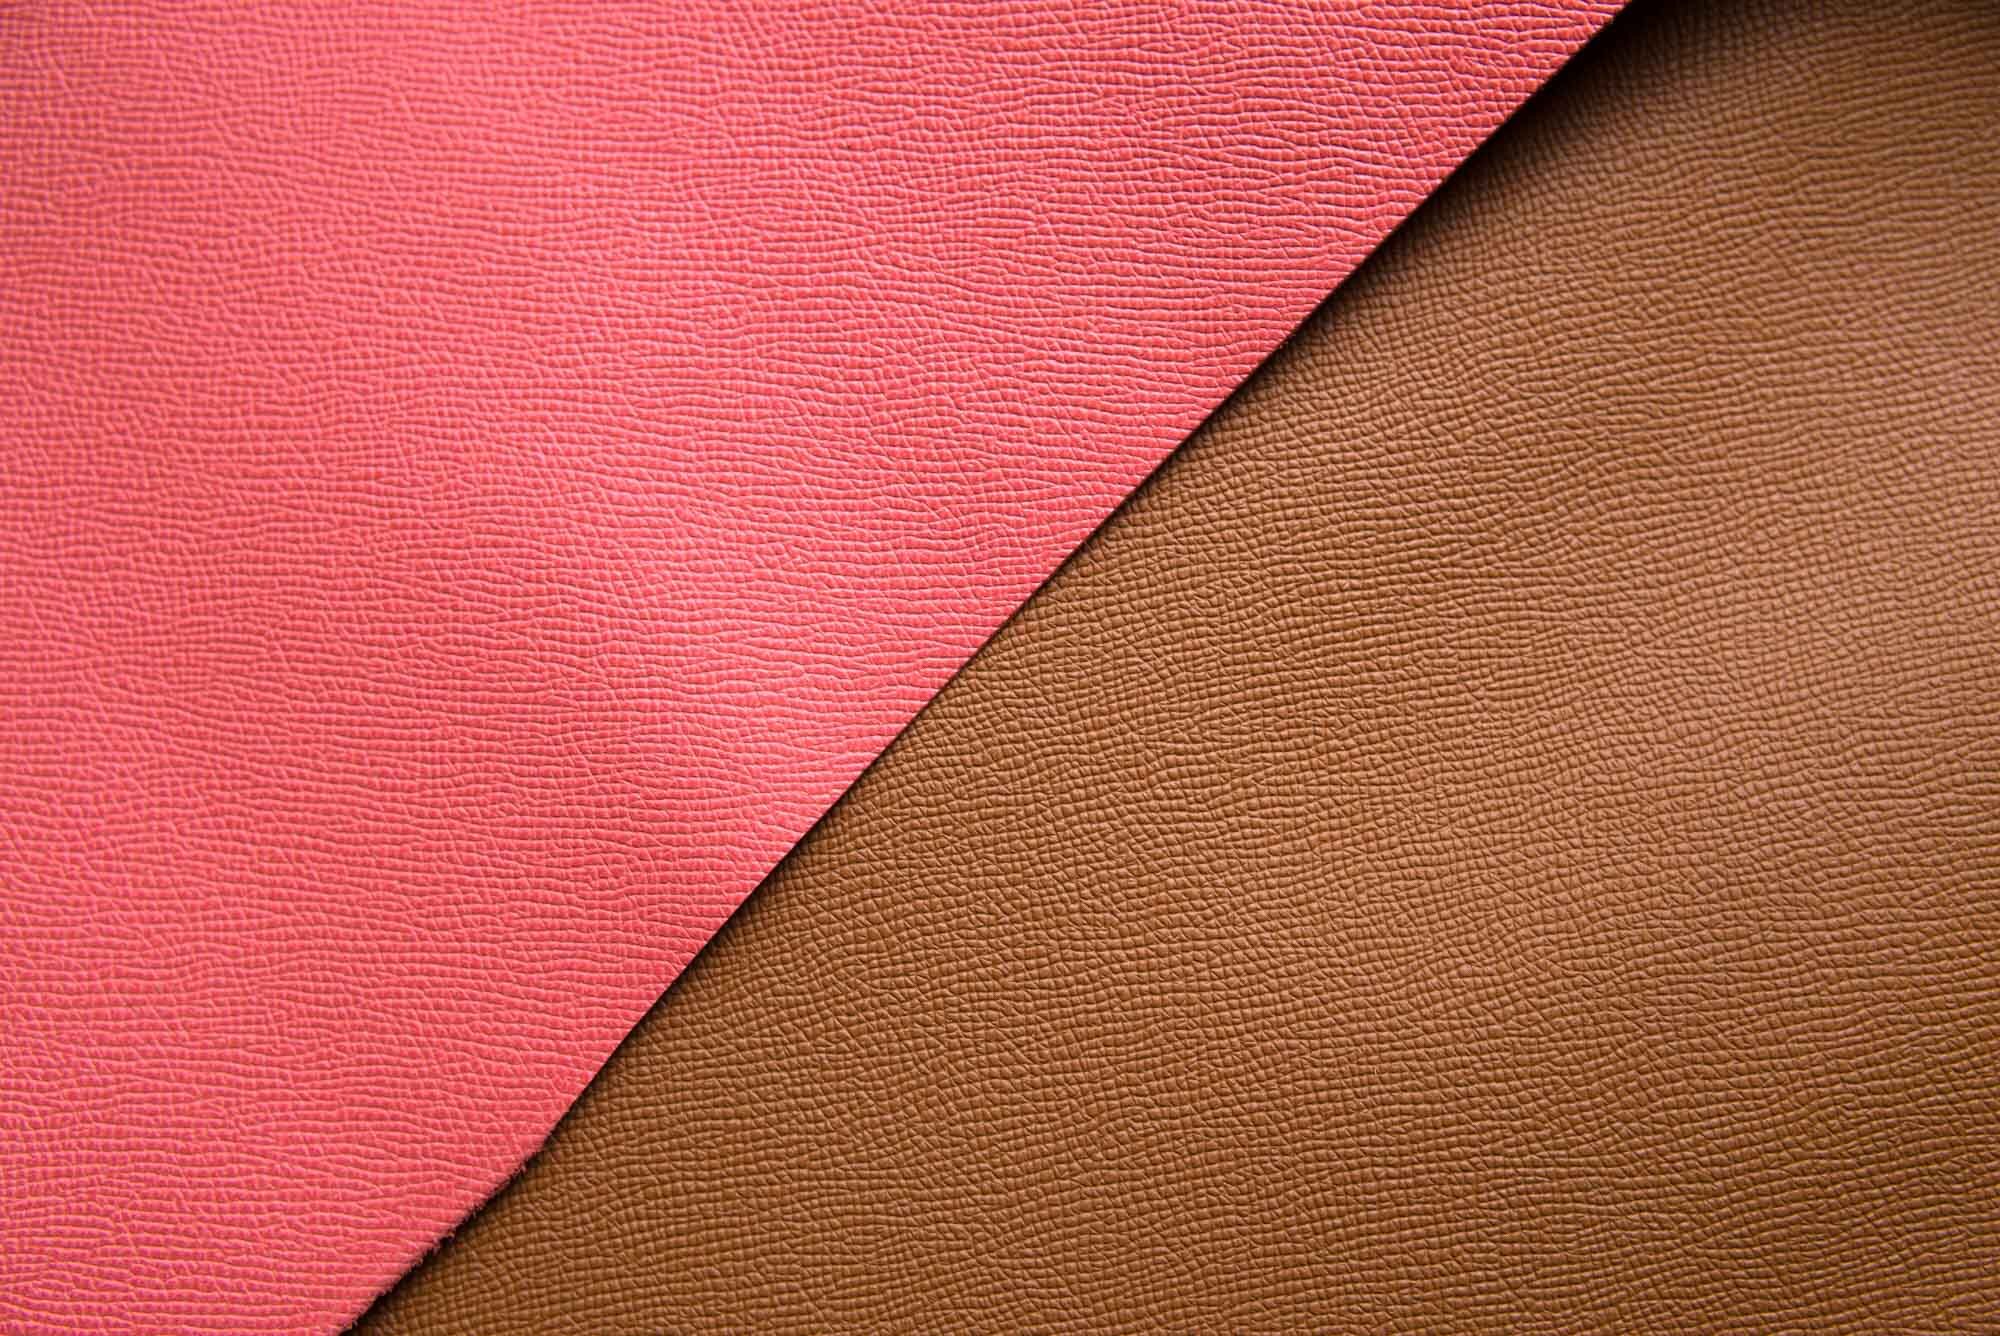 what is epsom leather made of